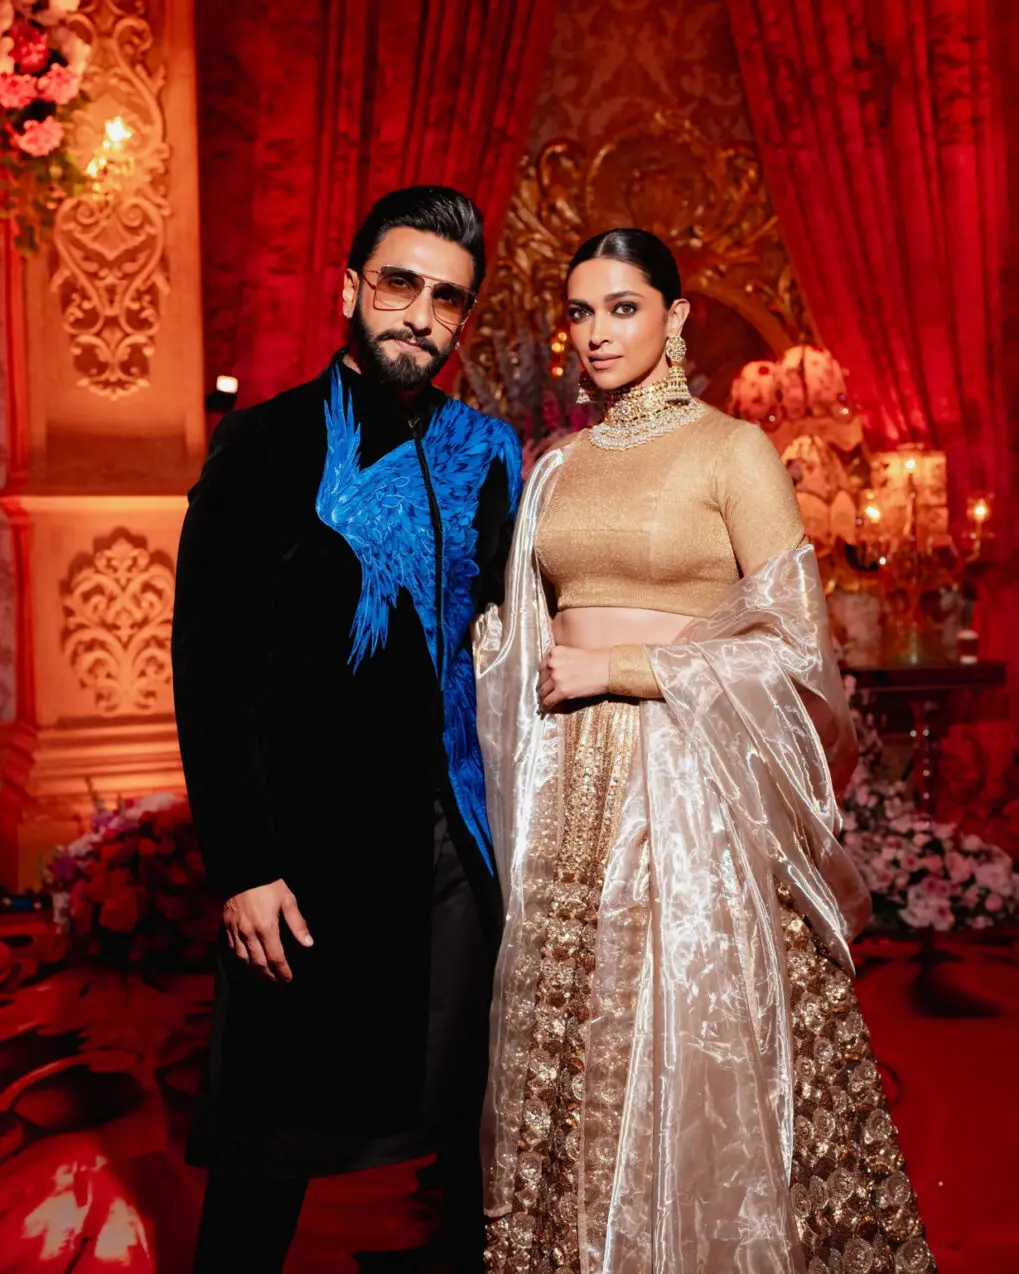 The wedding will be packed with celebrities. Actor Ranveer Singh and his wife and actor Deepika Padukone pose for a photo during the pre-wedding celebrations earlier this year.